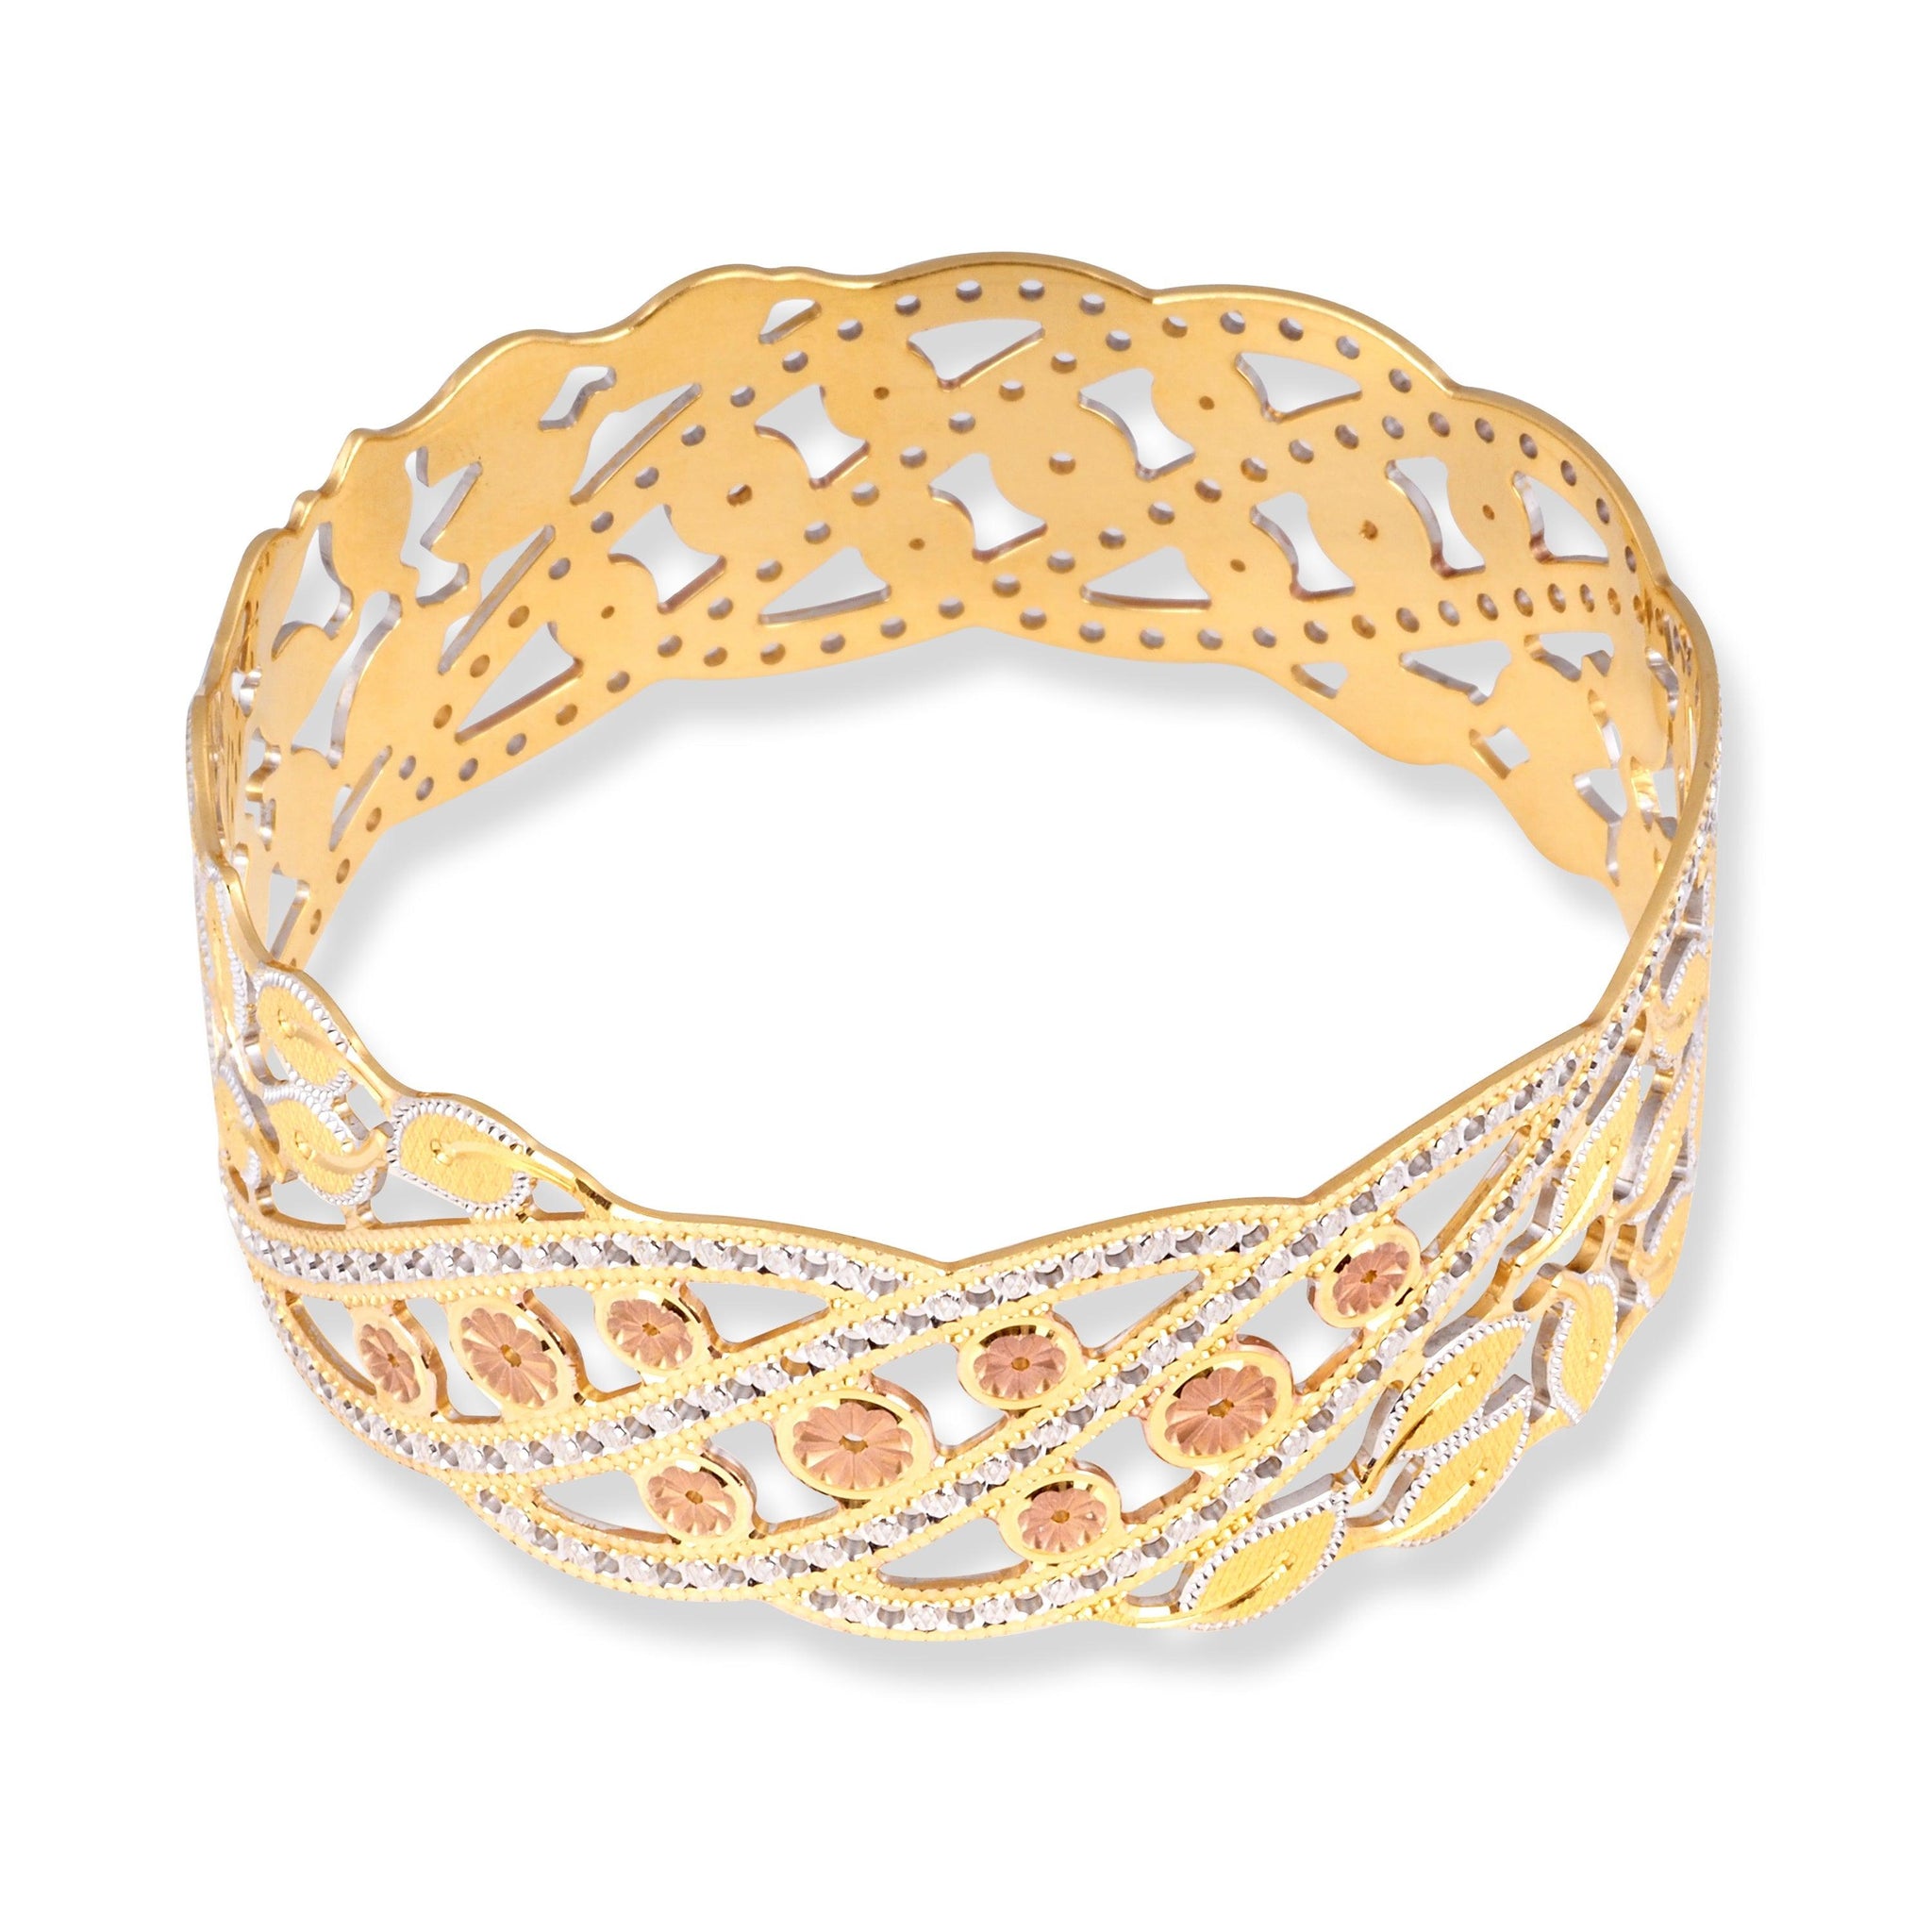 22ct Gold Bangle in Flower Pattern with Rose Gold & White Gold Rhodium Plate Finish B-8560